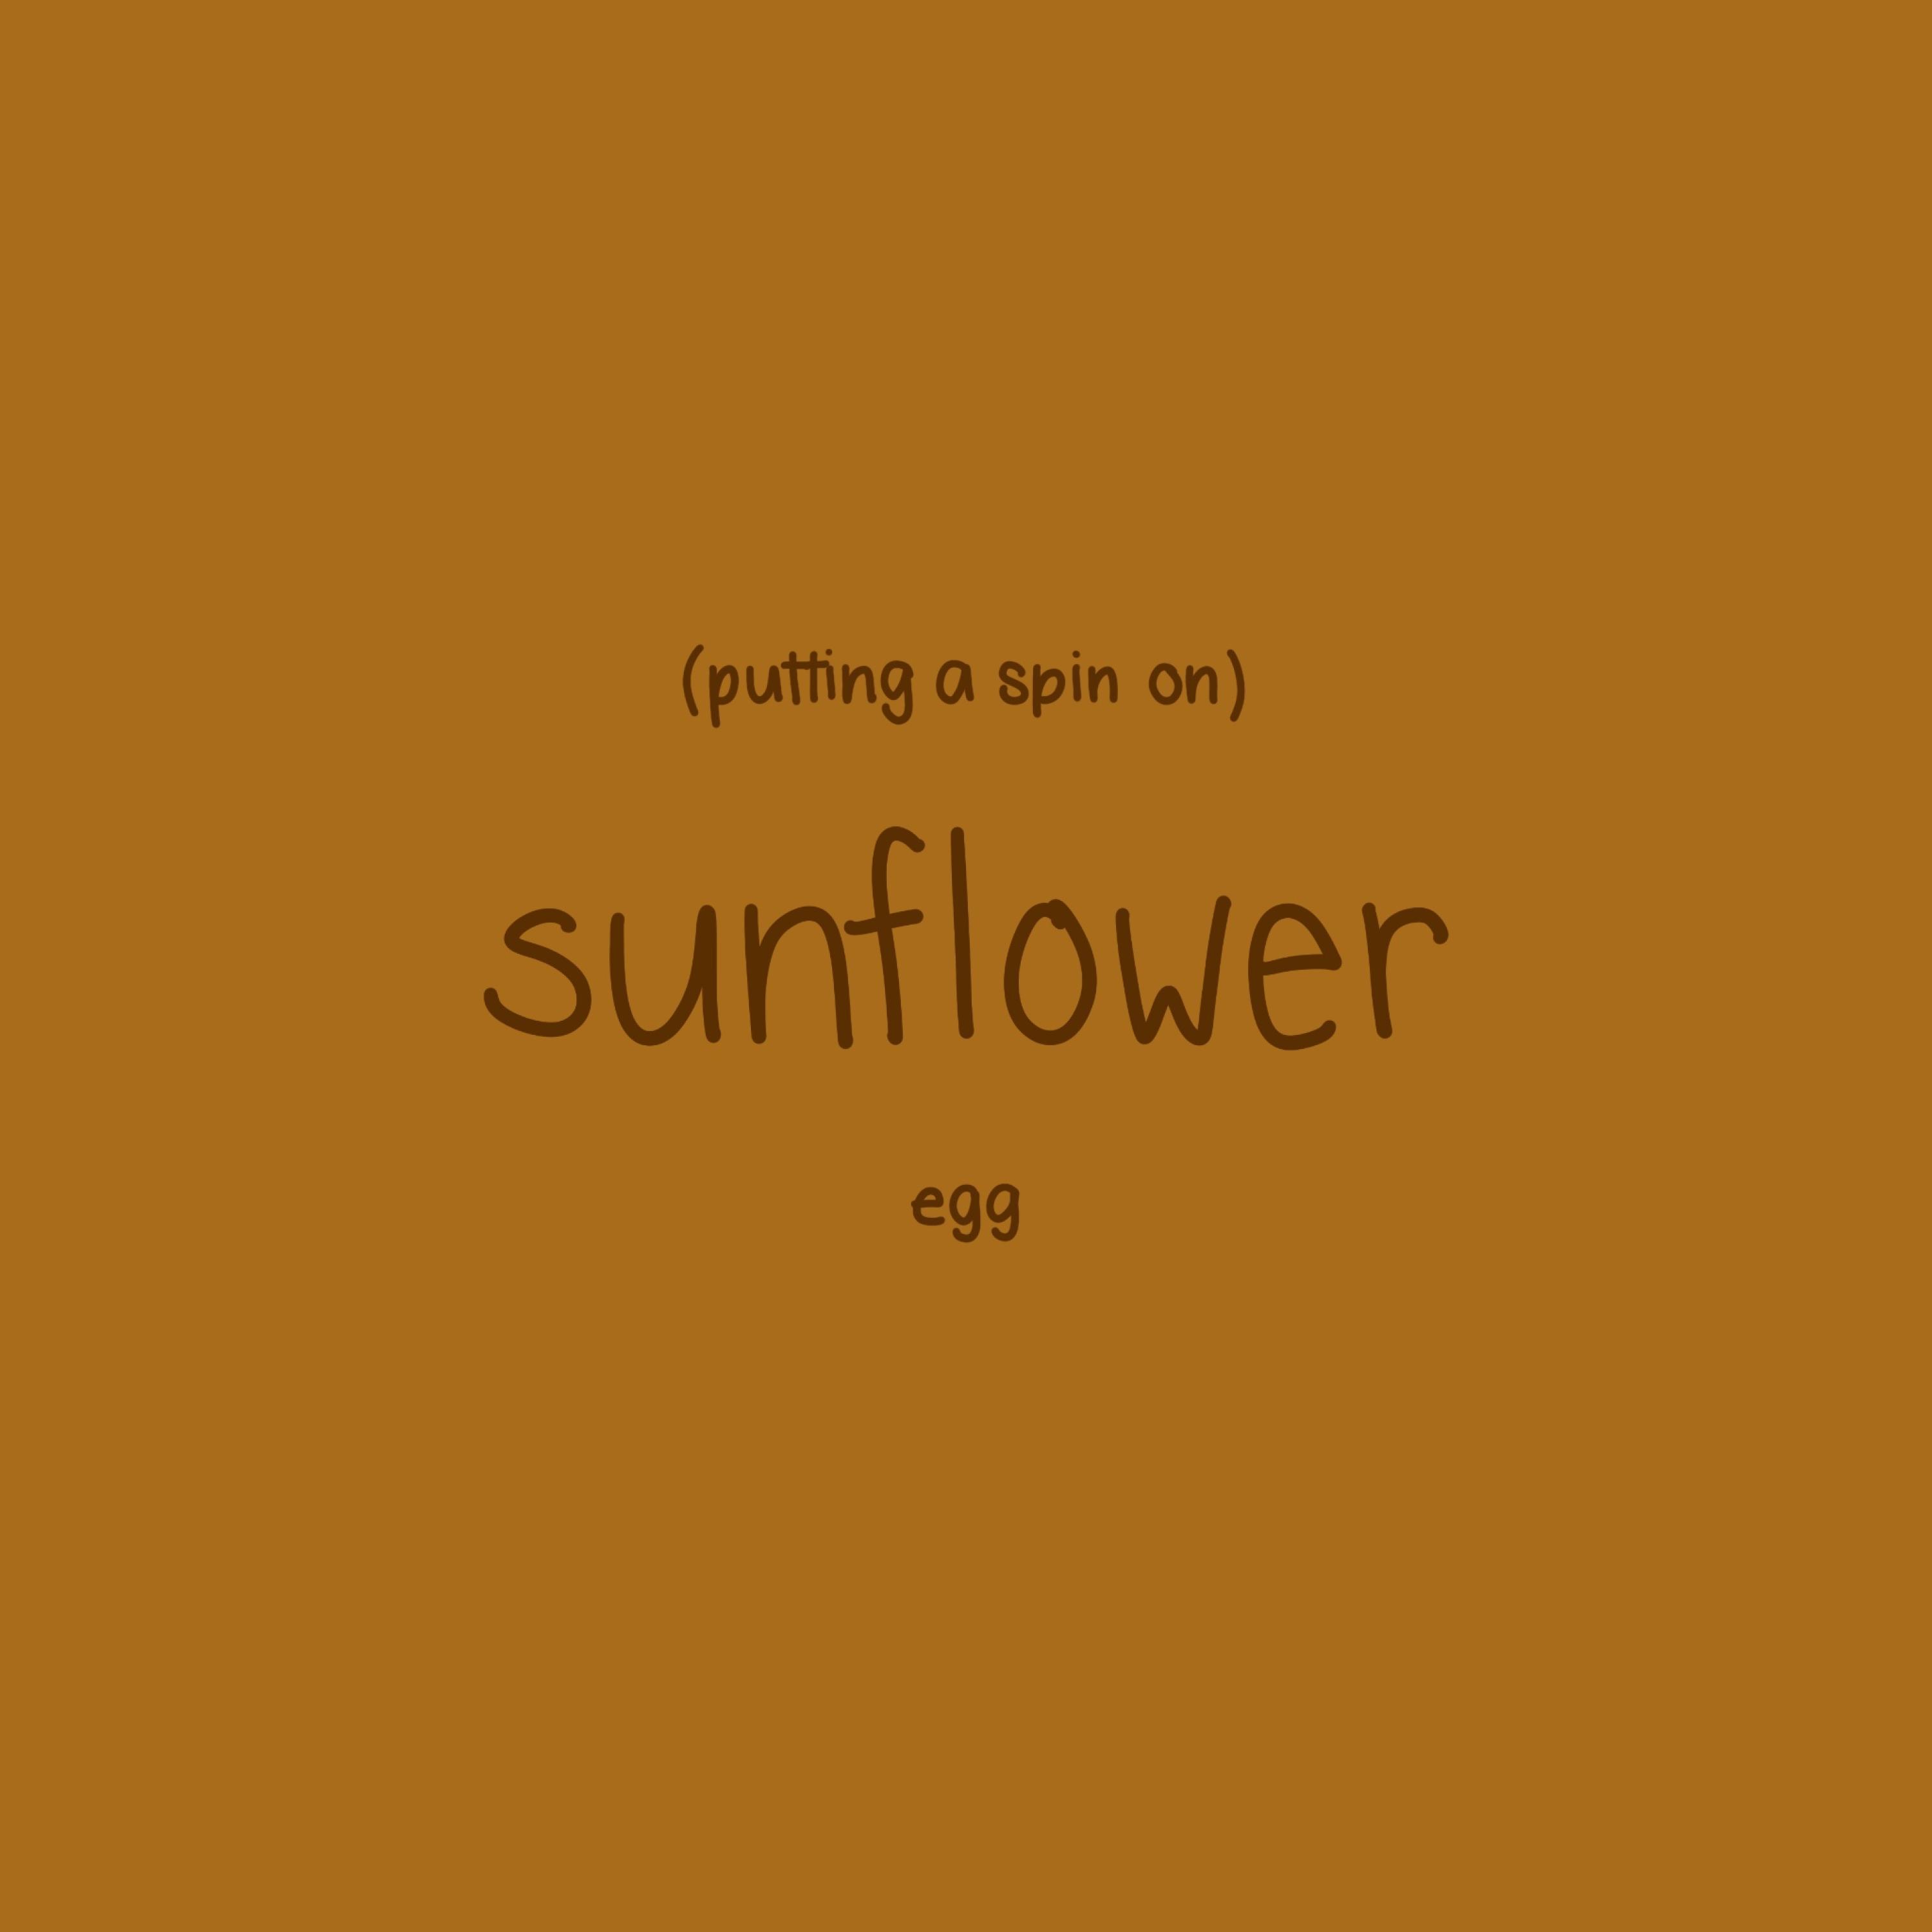 Egg - putting a spin on sunflower